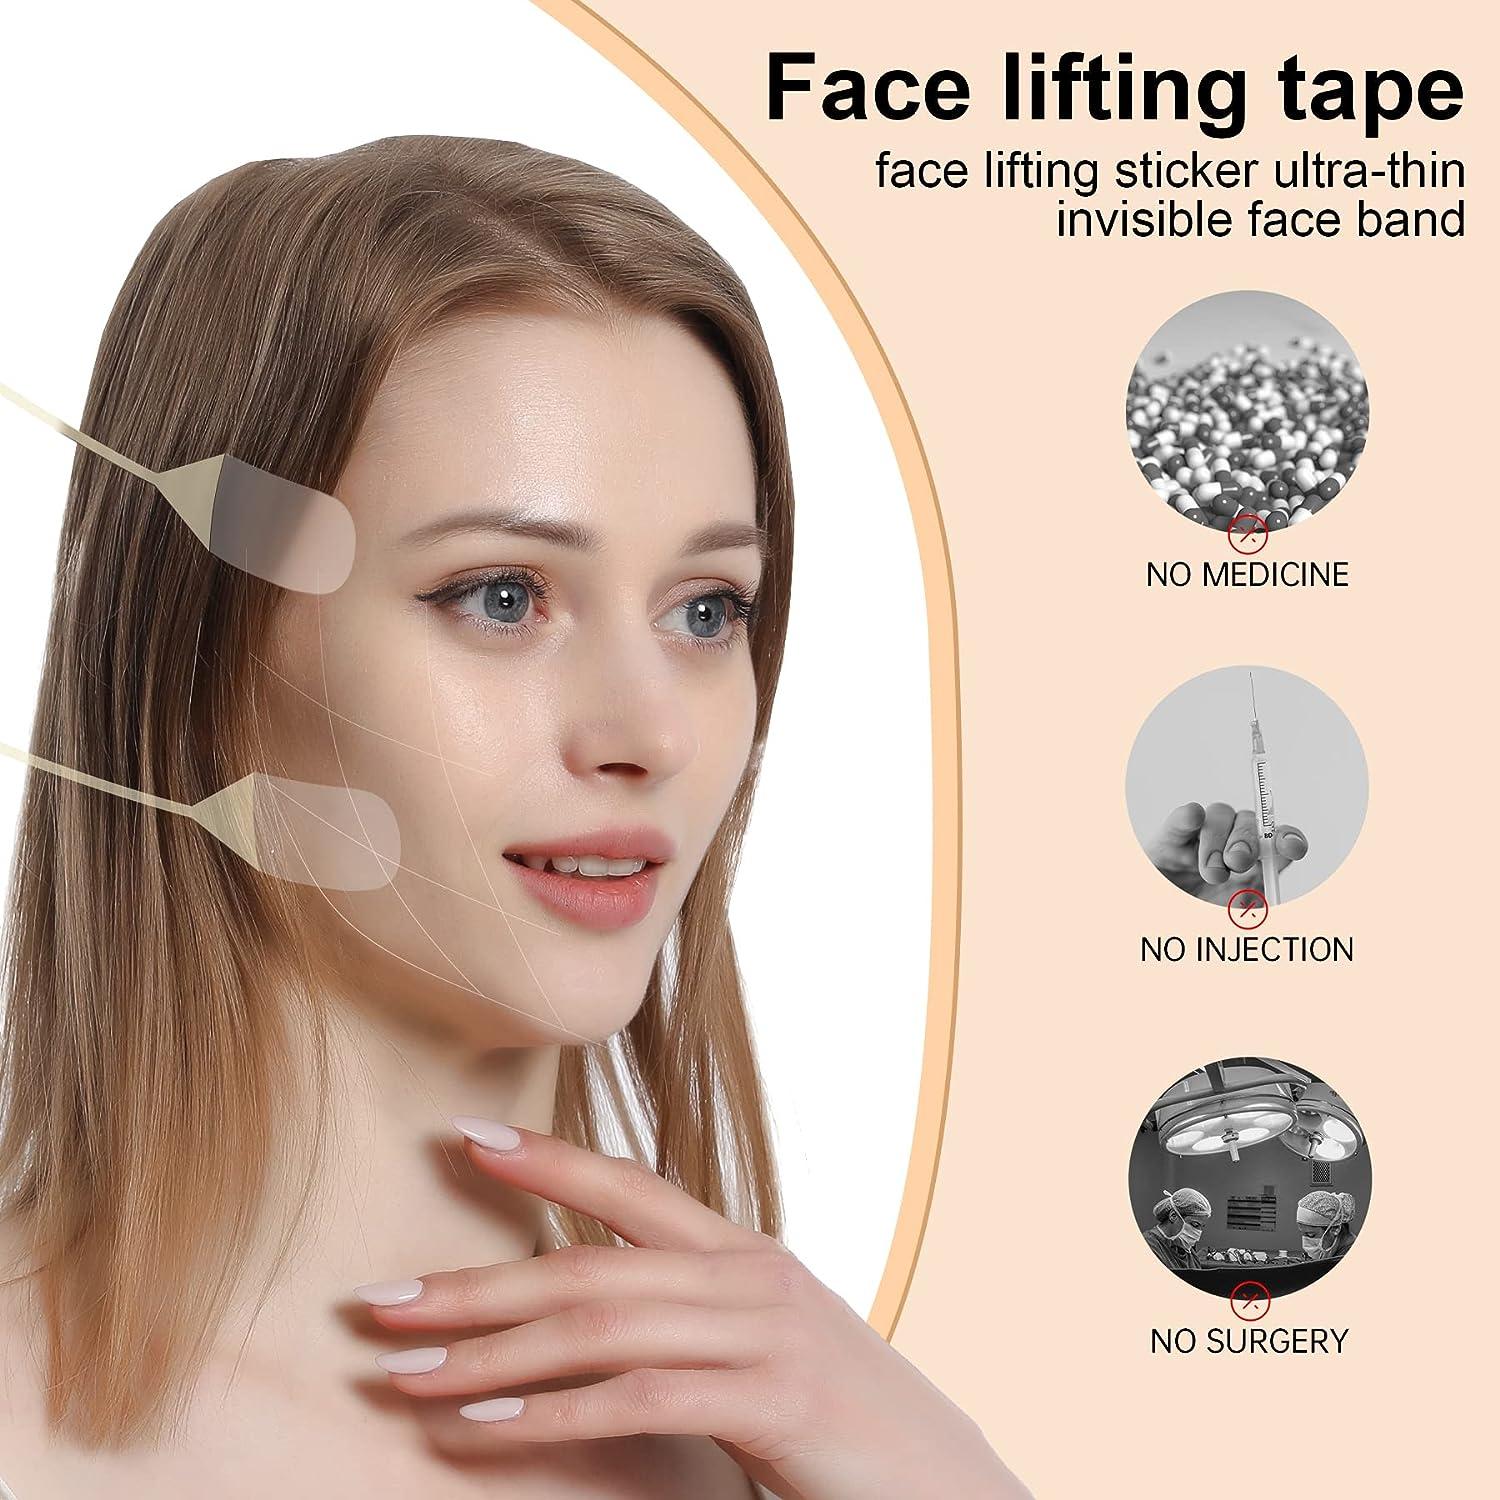 Buy OPTIYORK Face Lift Tape Invisible,Invisible Lifter Tape,Face Lifting  Invisible,Instant Sticker,Facelift for Invisible with Bands Double Chin  Wrinkles Saggy Skin (40 pcs face lifter) Online at Low Prices in India 